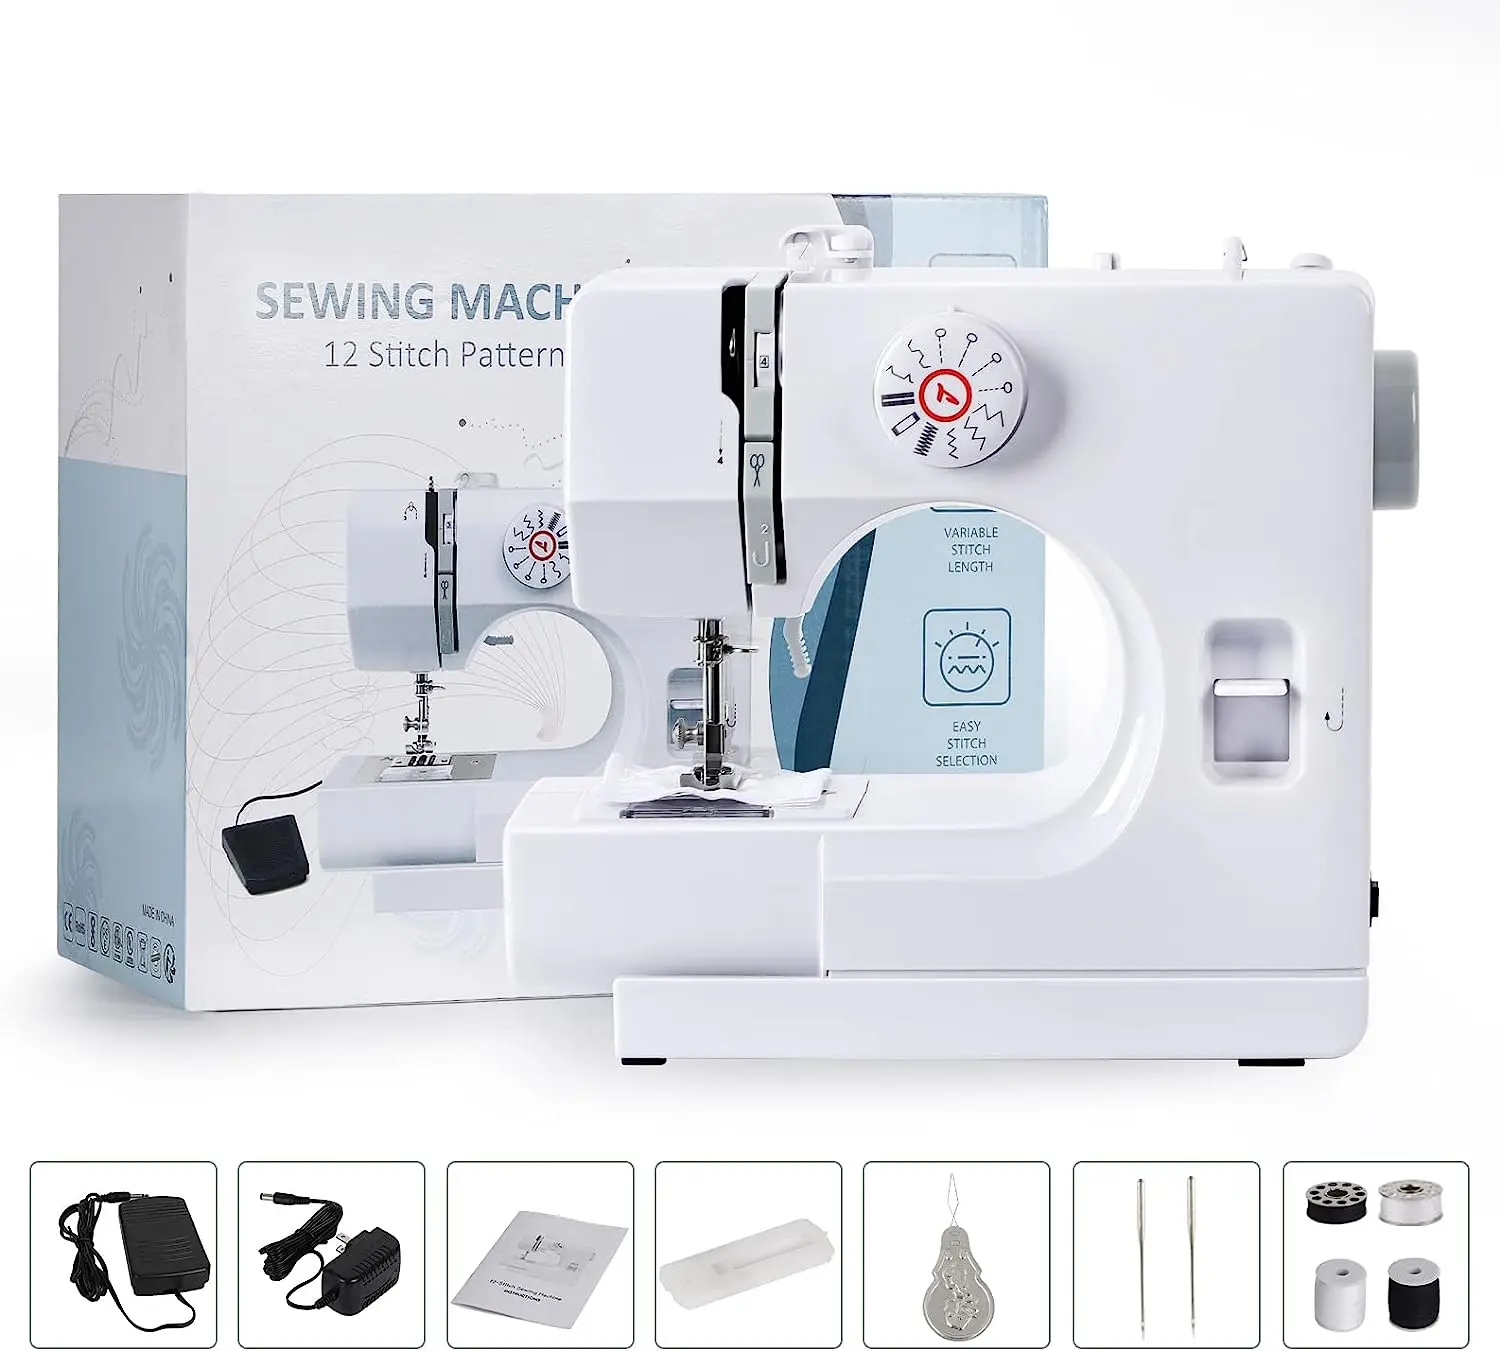 

Upgraded Household Gray 725 Sewing Machine for Beginners，Portable DIY Textile Crafting Mending Sewing Machine with 12 Stitches